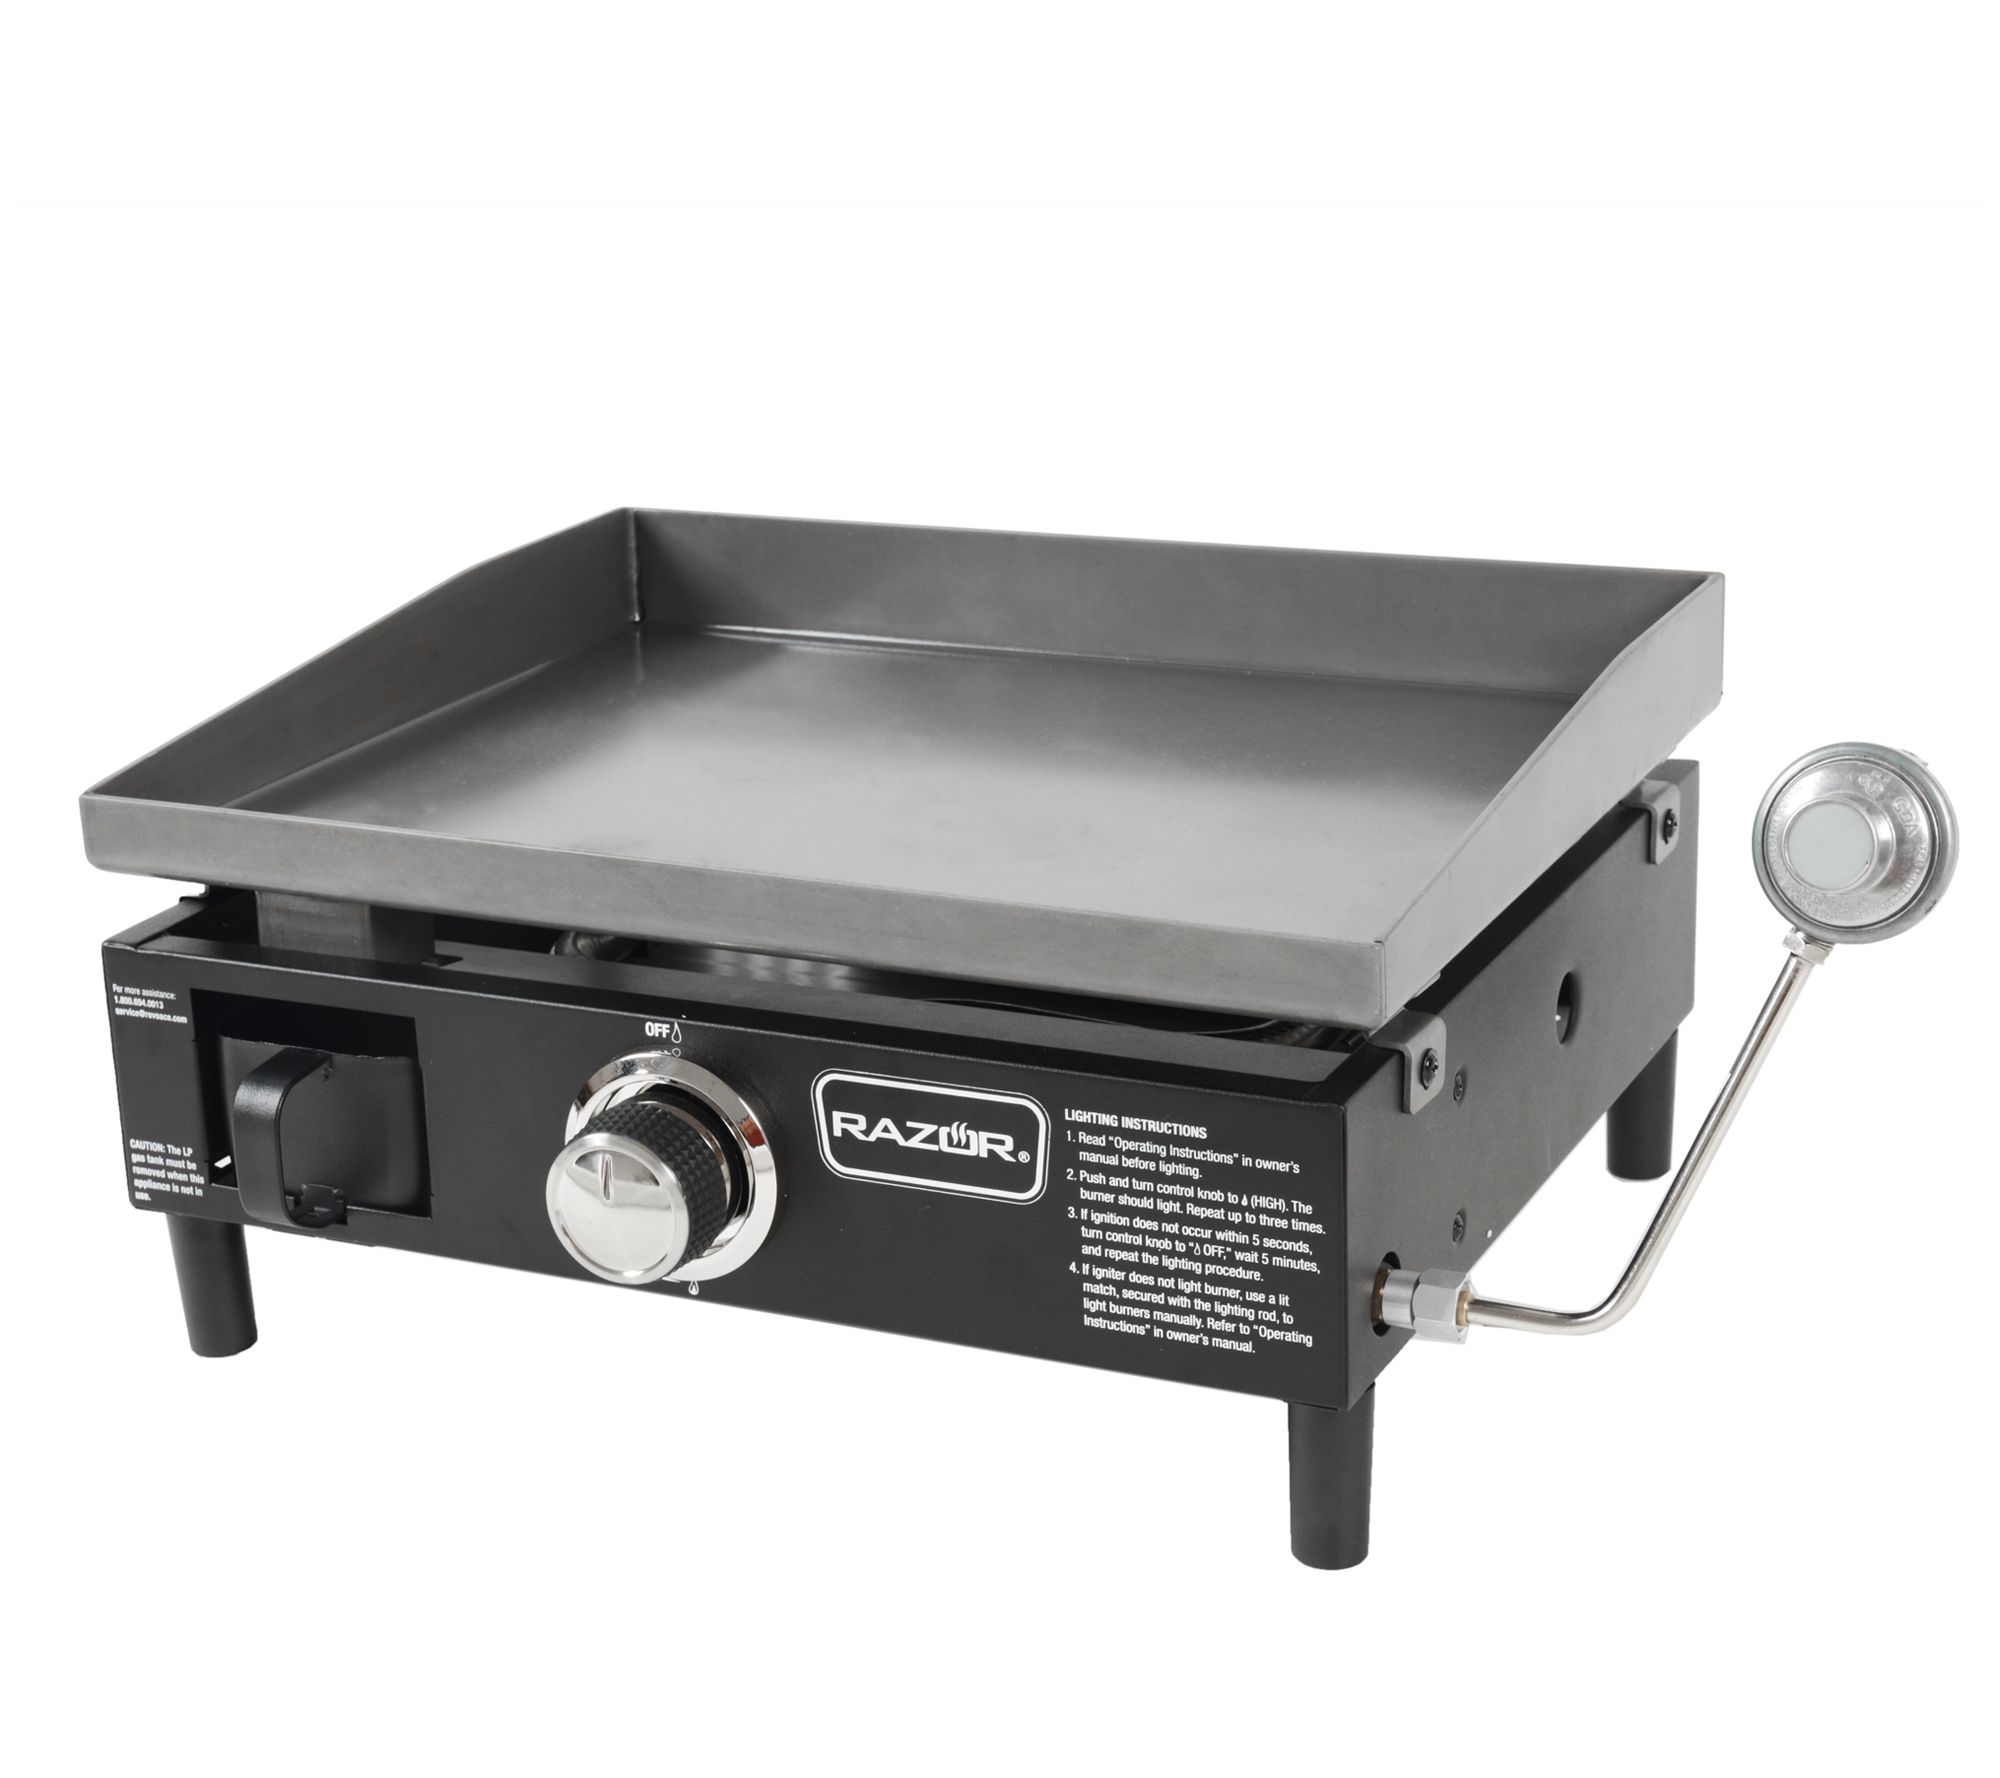 Yukon Glory Universal Portable Grill Table Stainless Steel Griddle